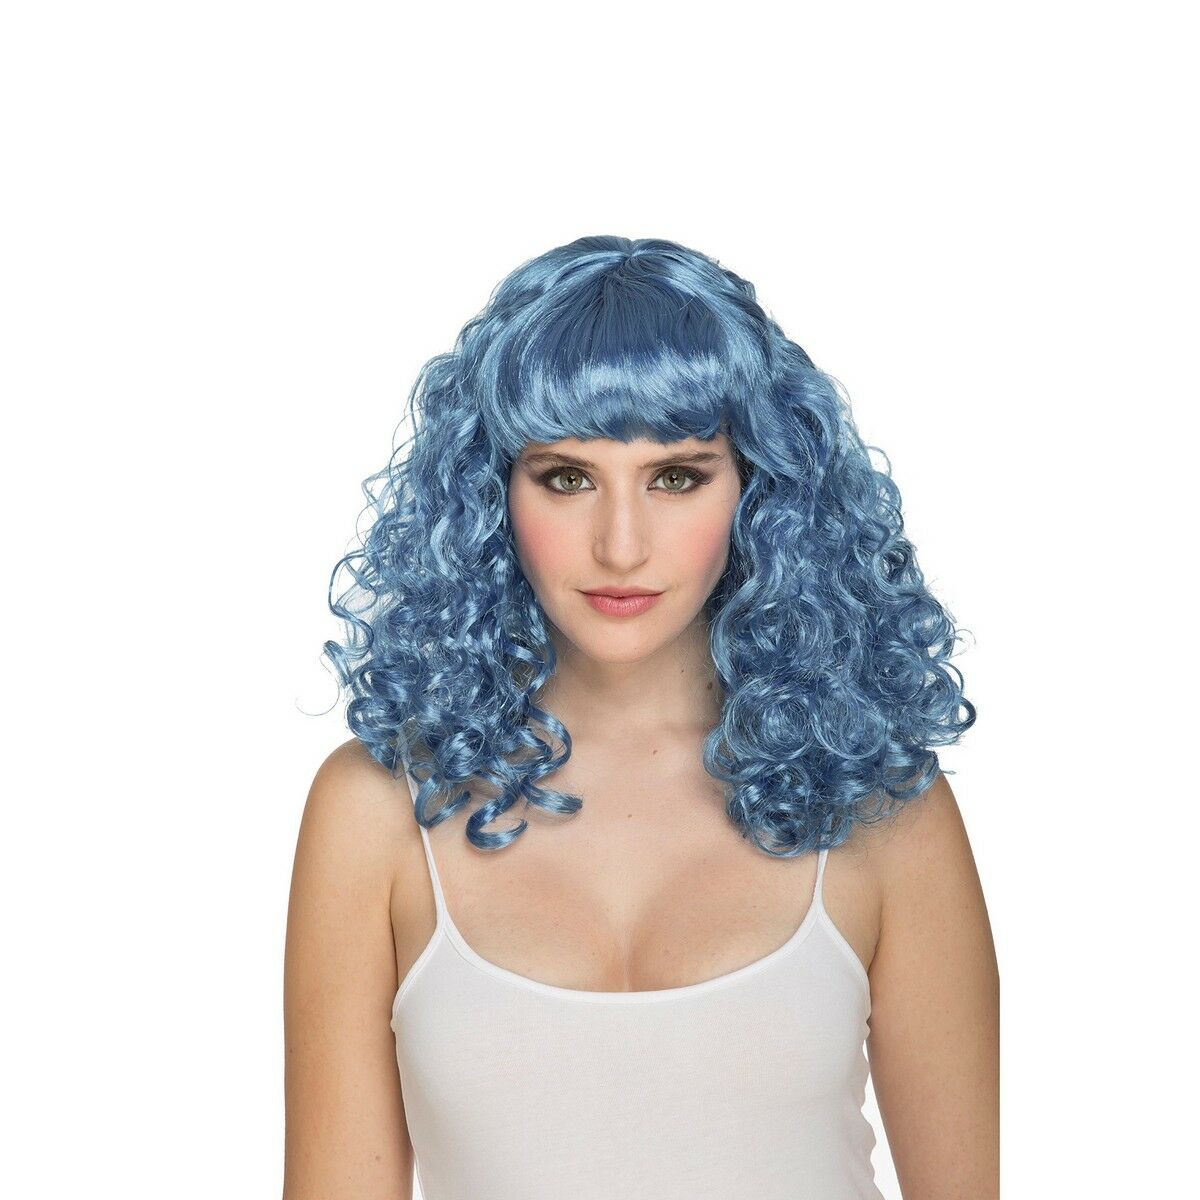 Wigs My Other Me Curled Fringe Blue